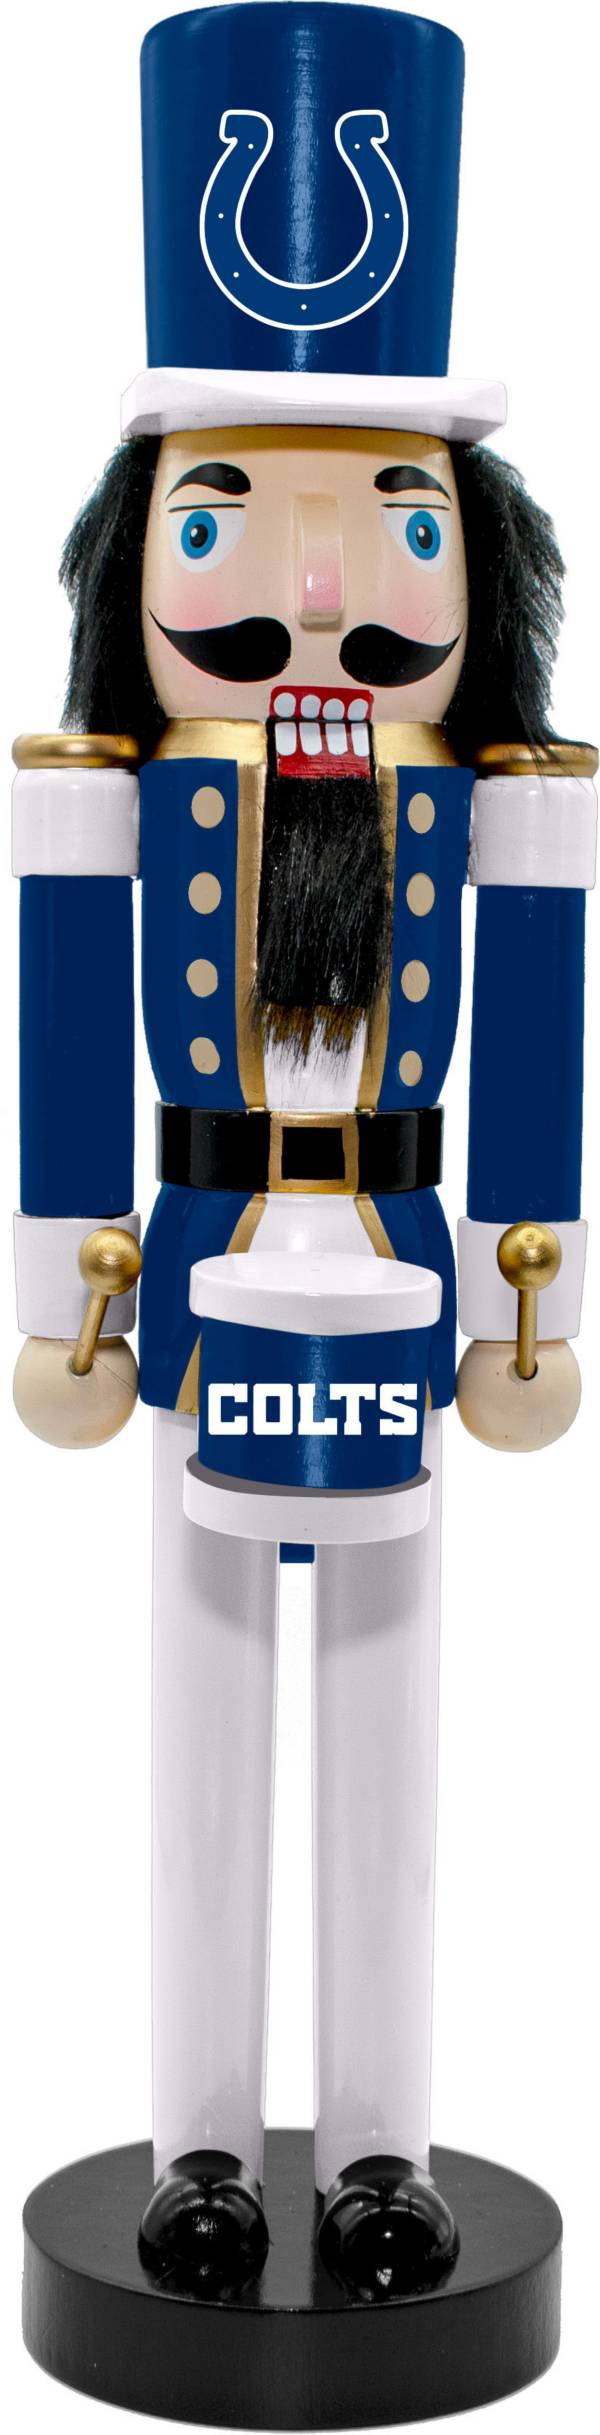 Memory Company Indianapolis Colts 14 Inch Nutcracker product image